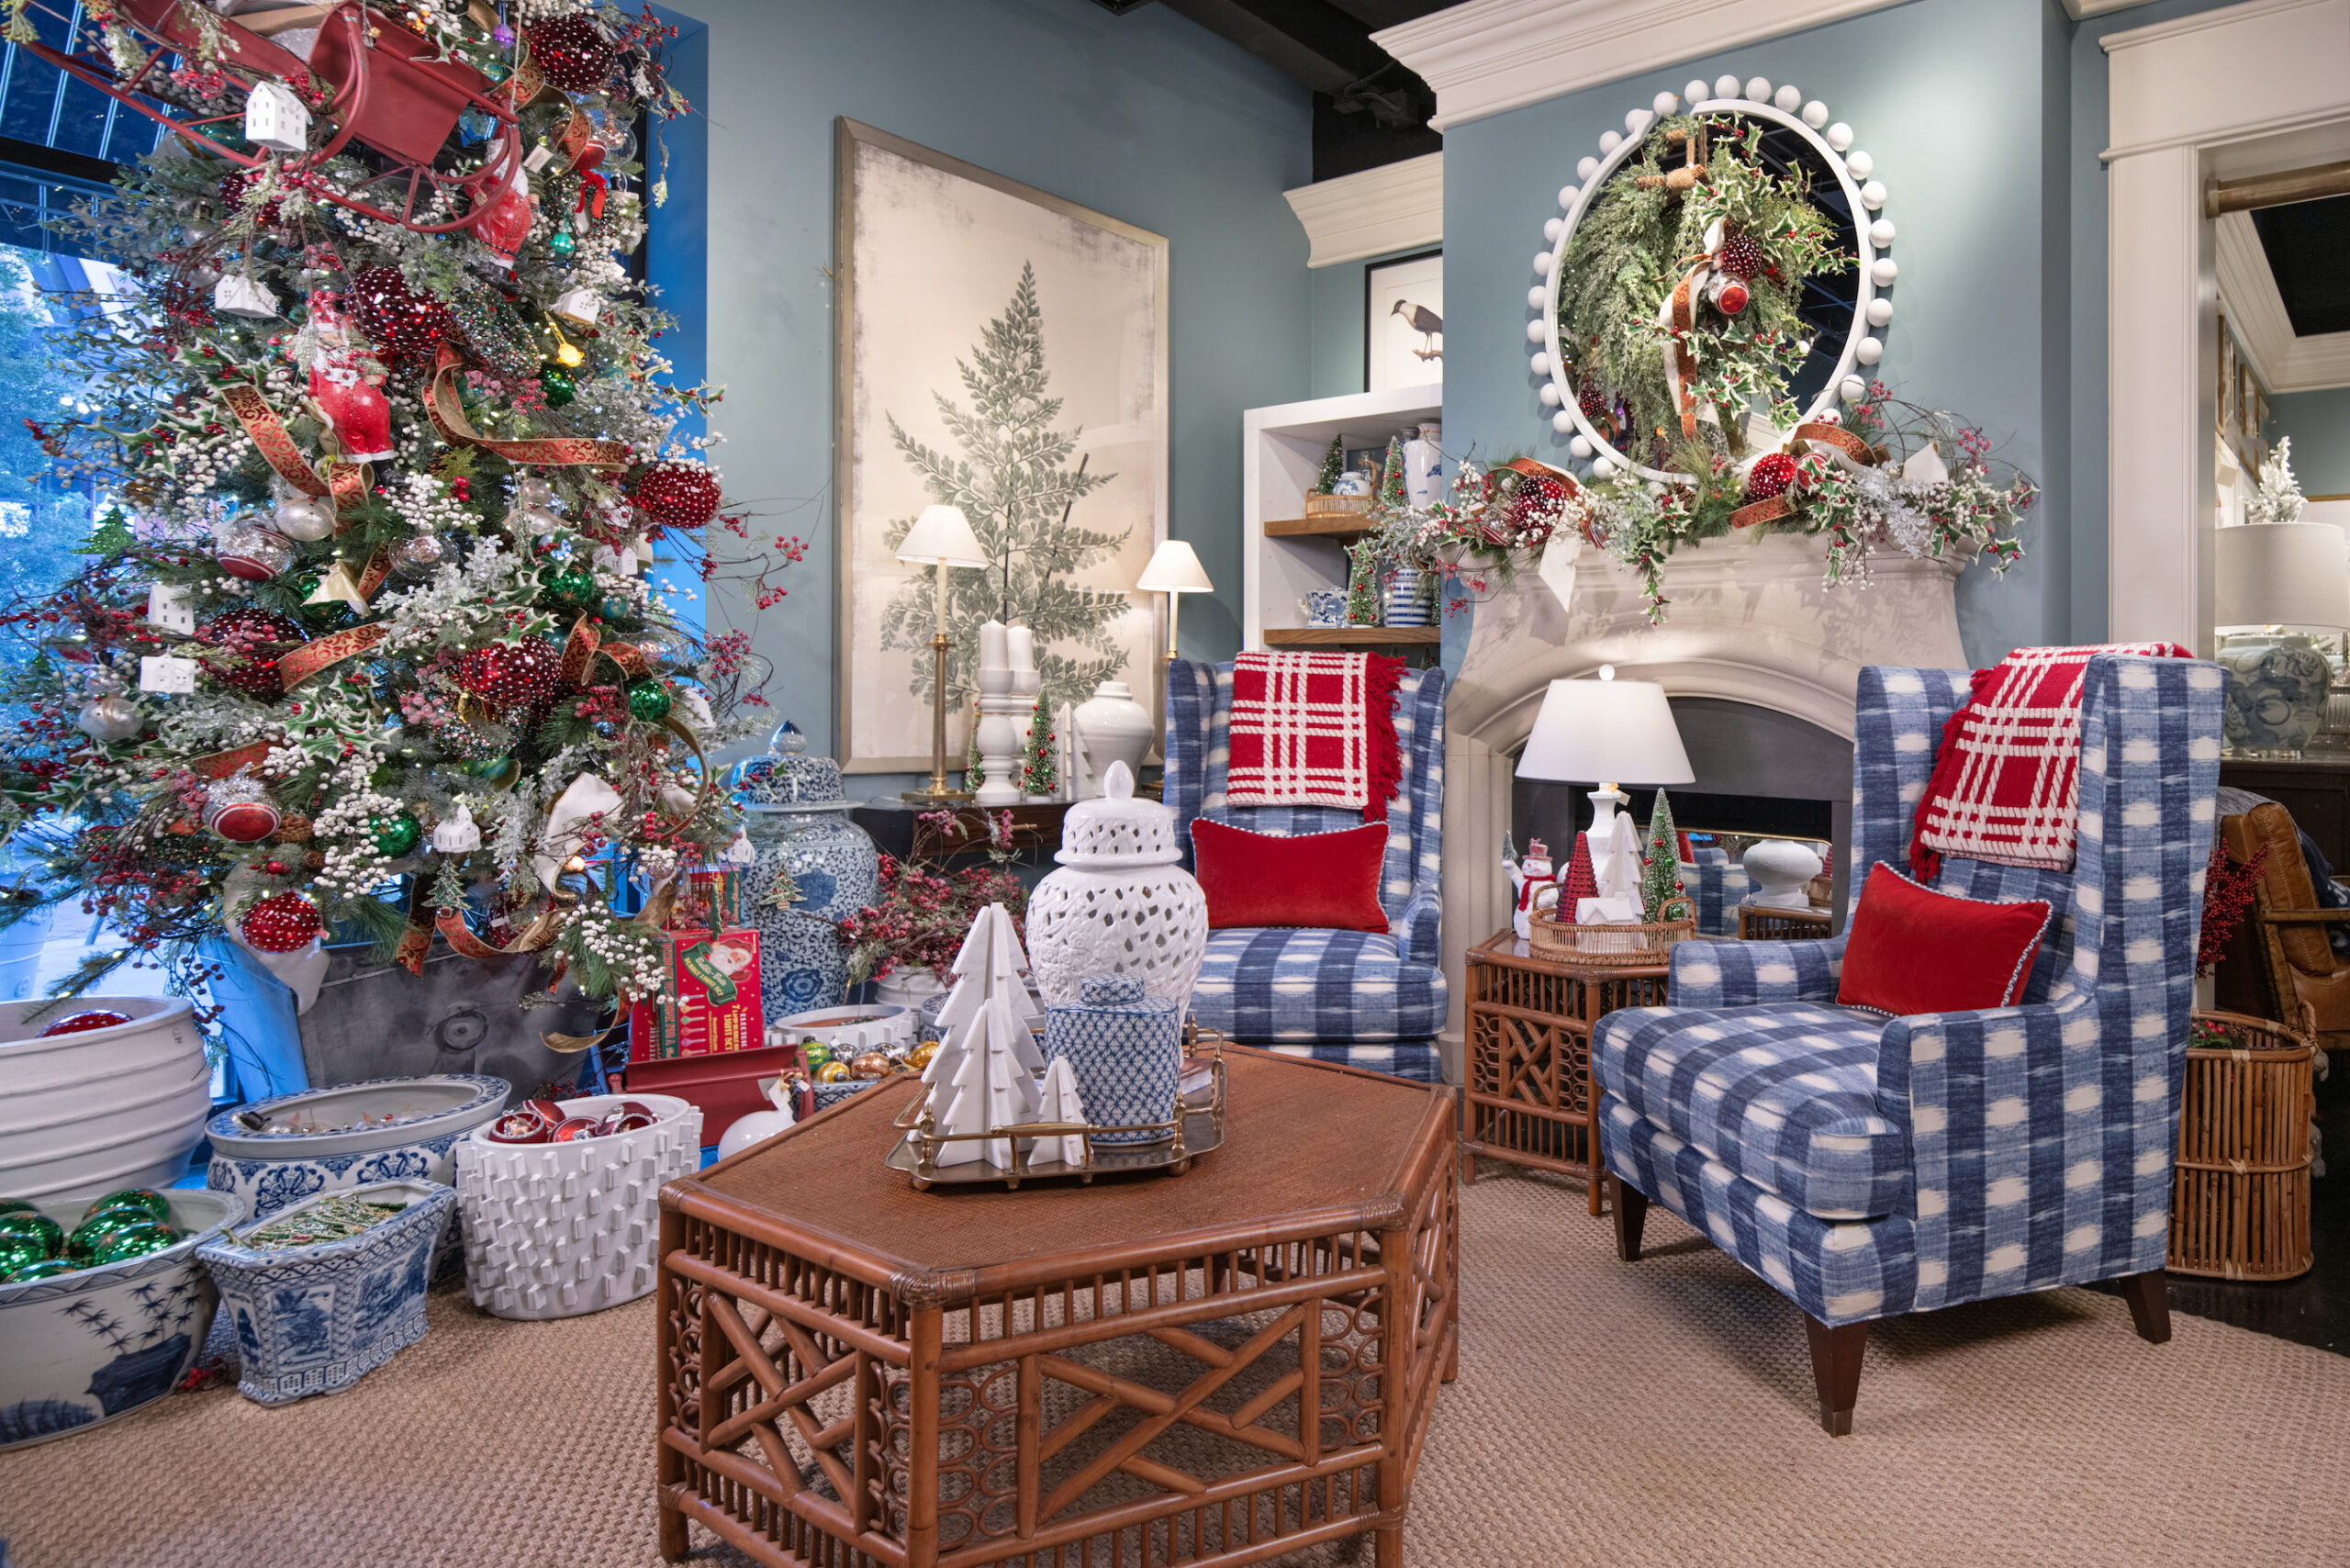 Red Christmas Tree Ideas and This Year's Christmas Living Room